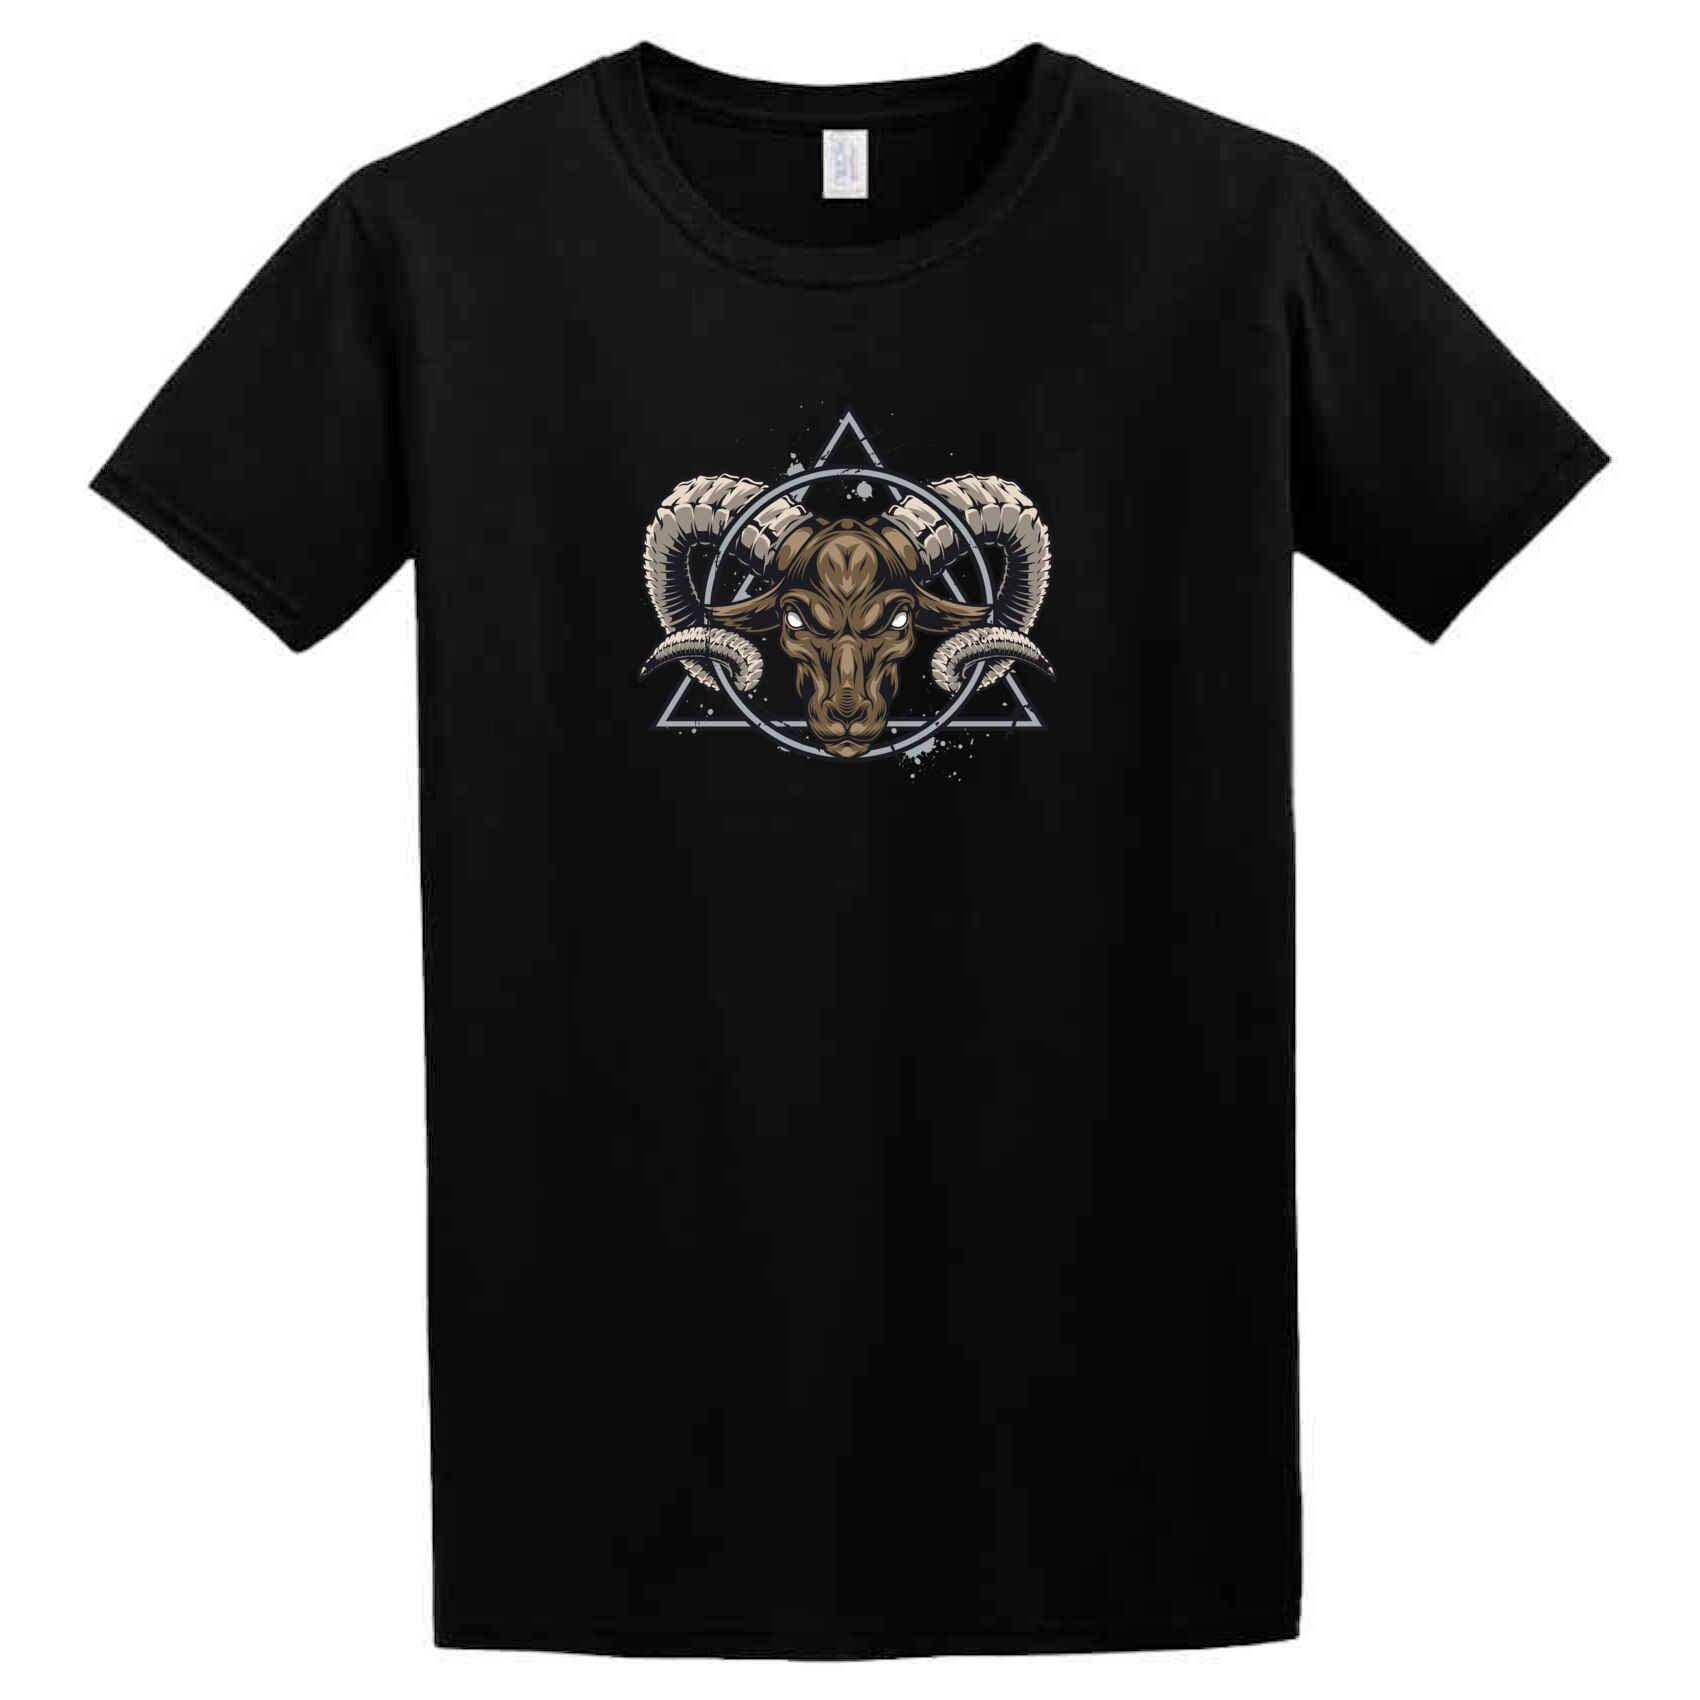 A black Satan T-Shirt with a ram's head on it from Twisted Gifts.